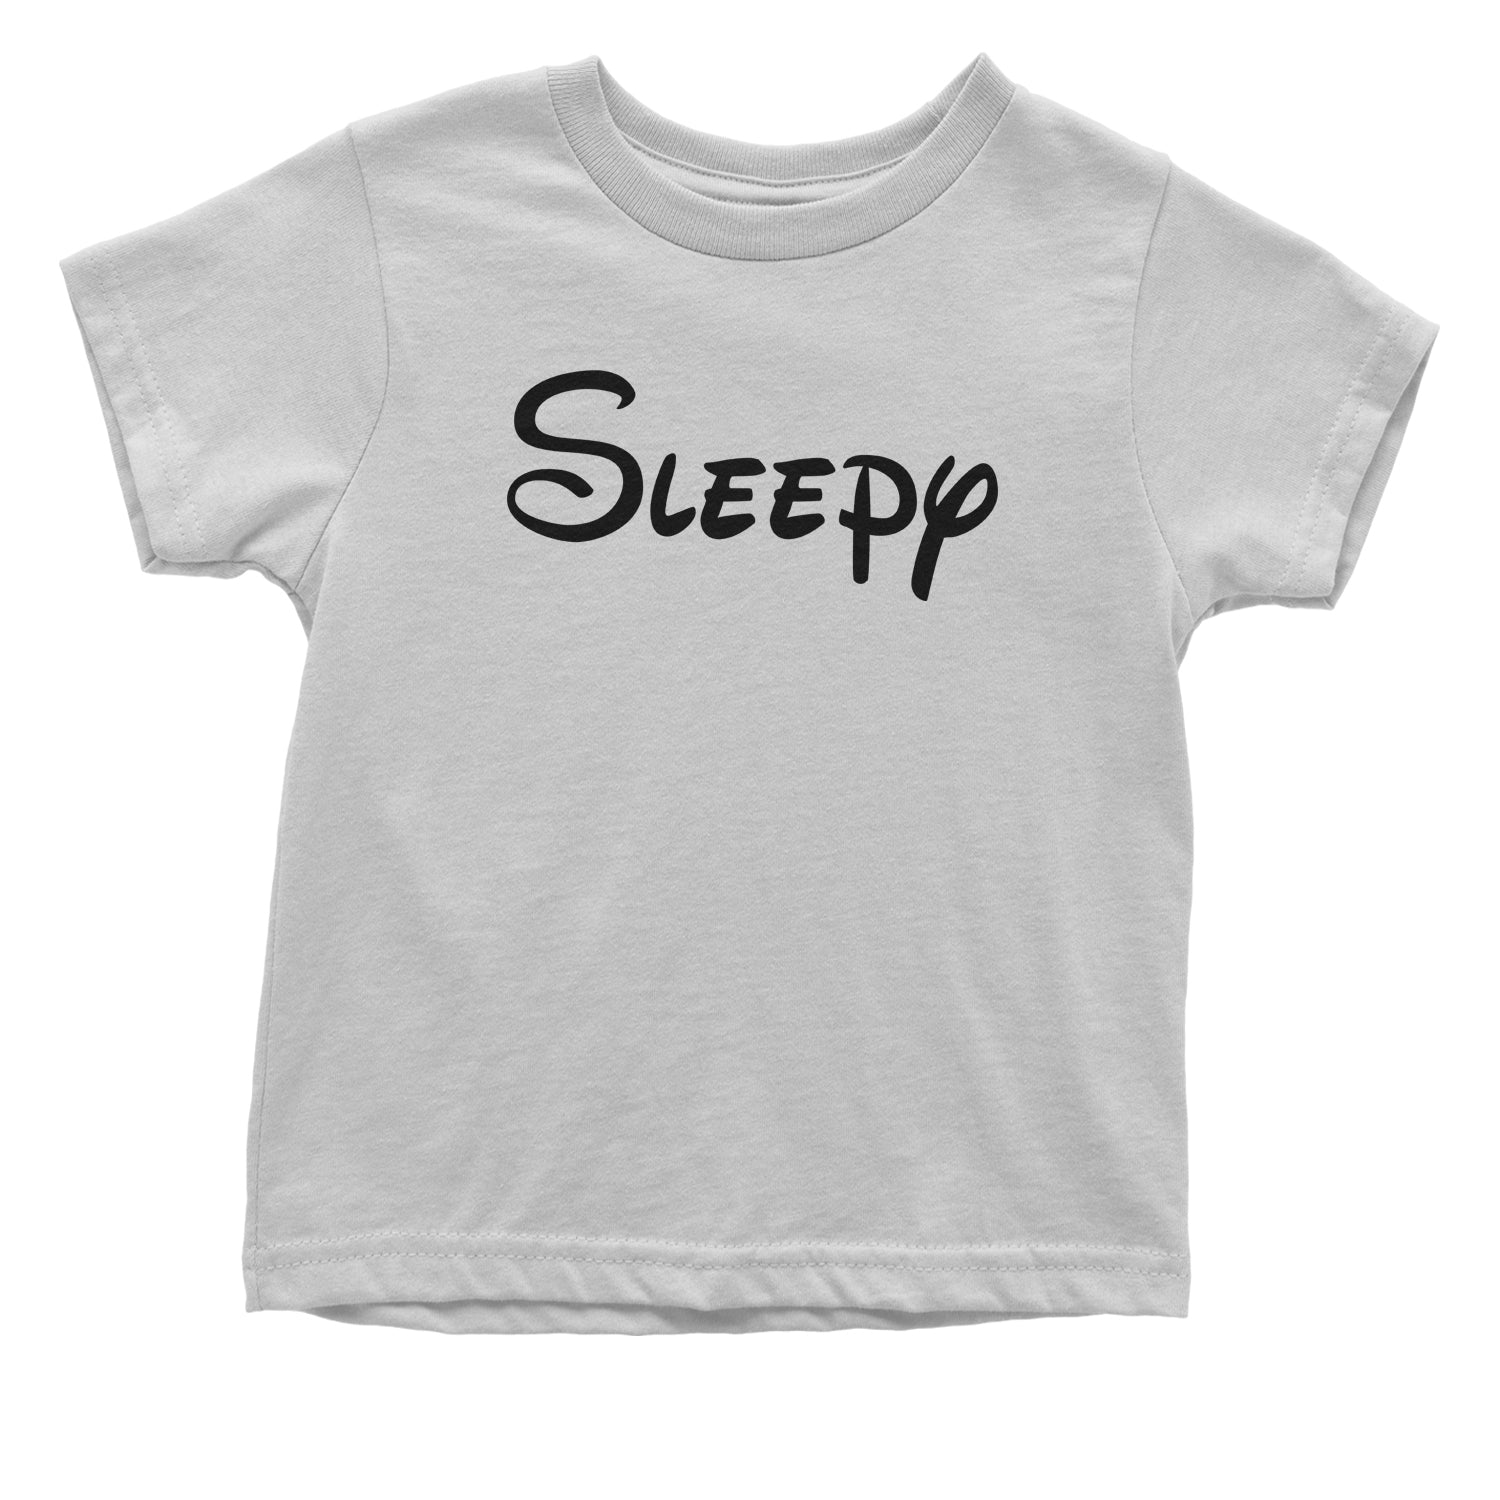 Sleepy - 7 Dwarfs Costume Toddler T-Shirt and, costume, dwarfs, group, halloween, matching, seven, snow, the, white by Expression Tees